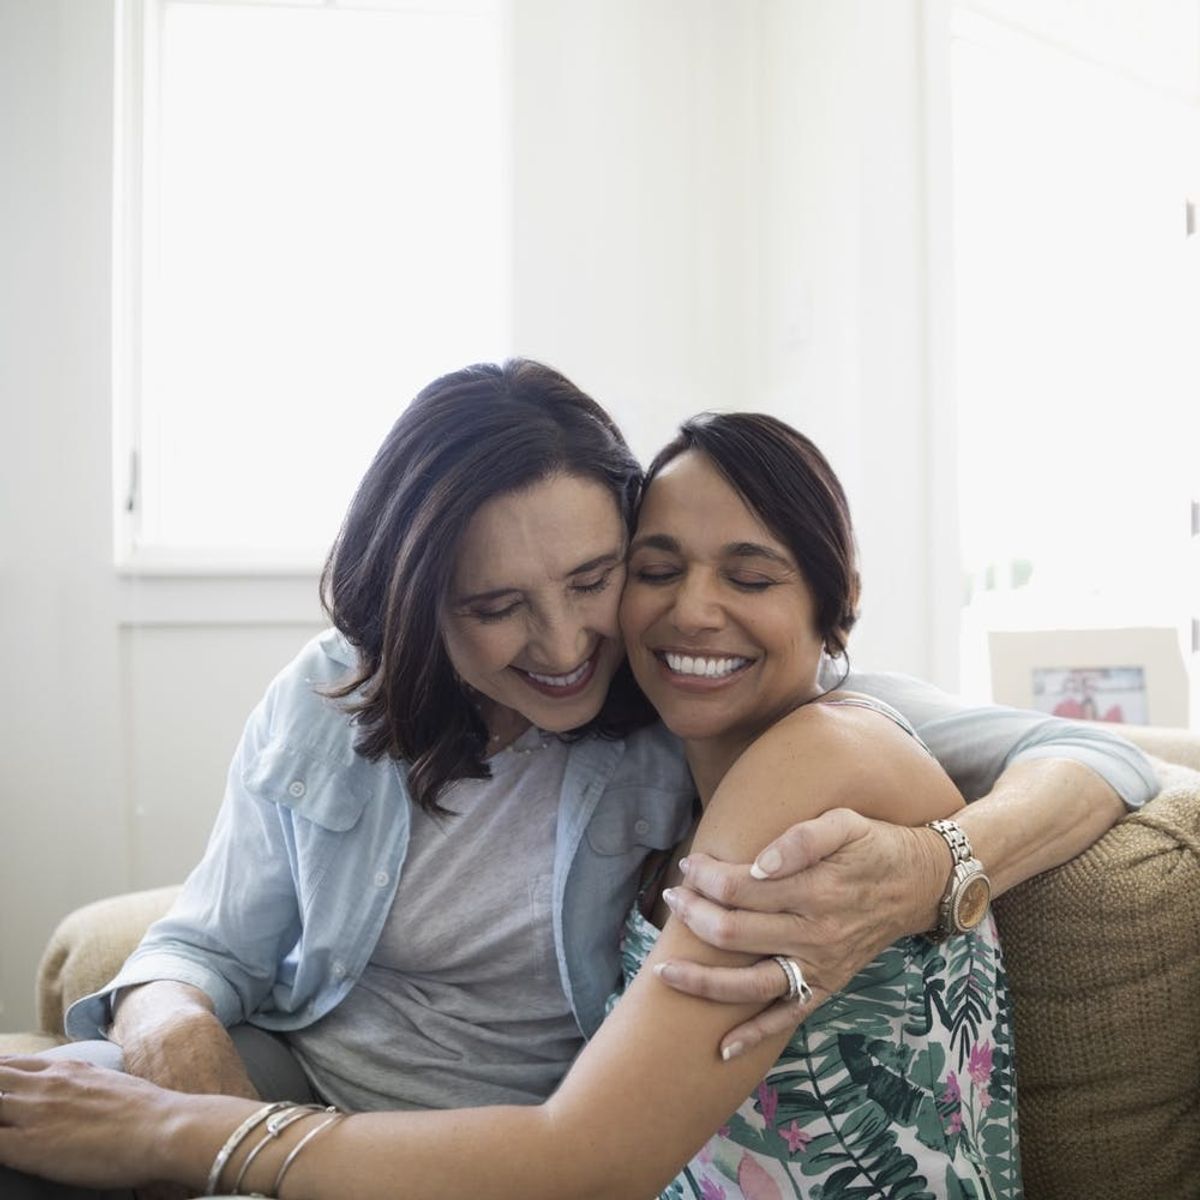 8 Useful Life Lessons We Subconsciously Learned From Mom